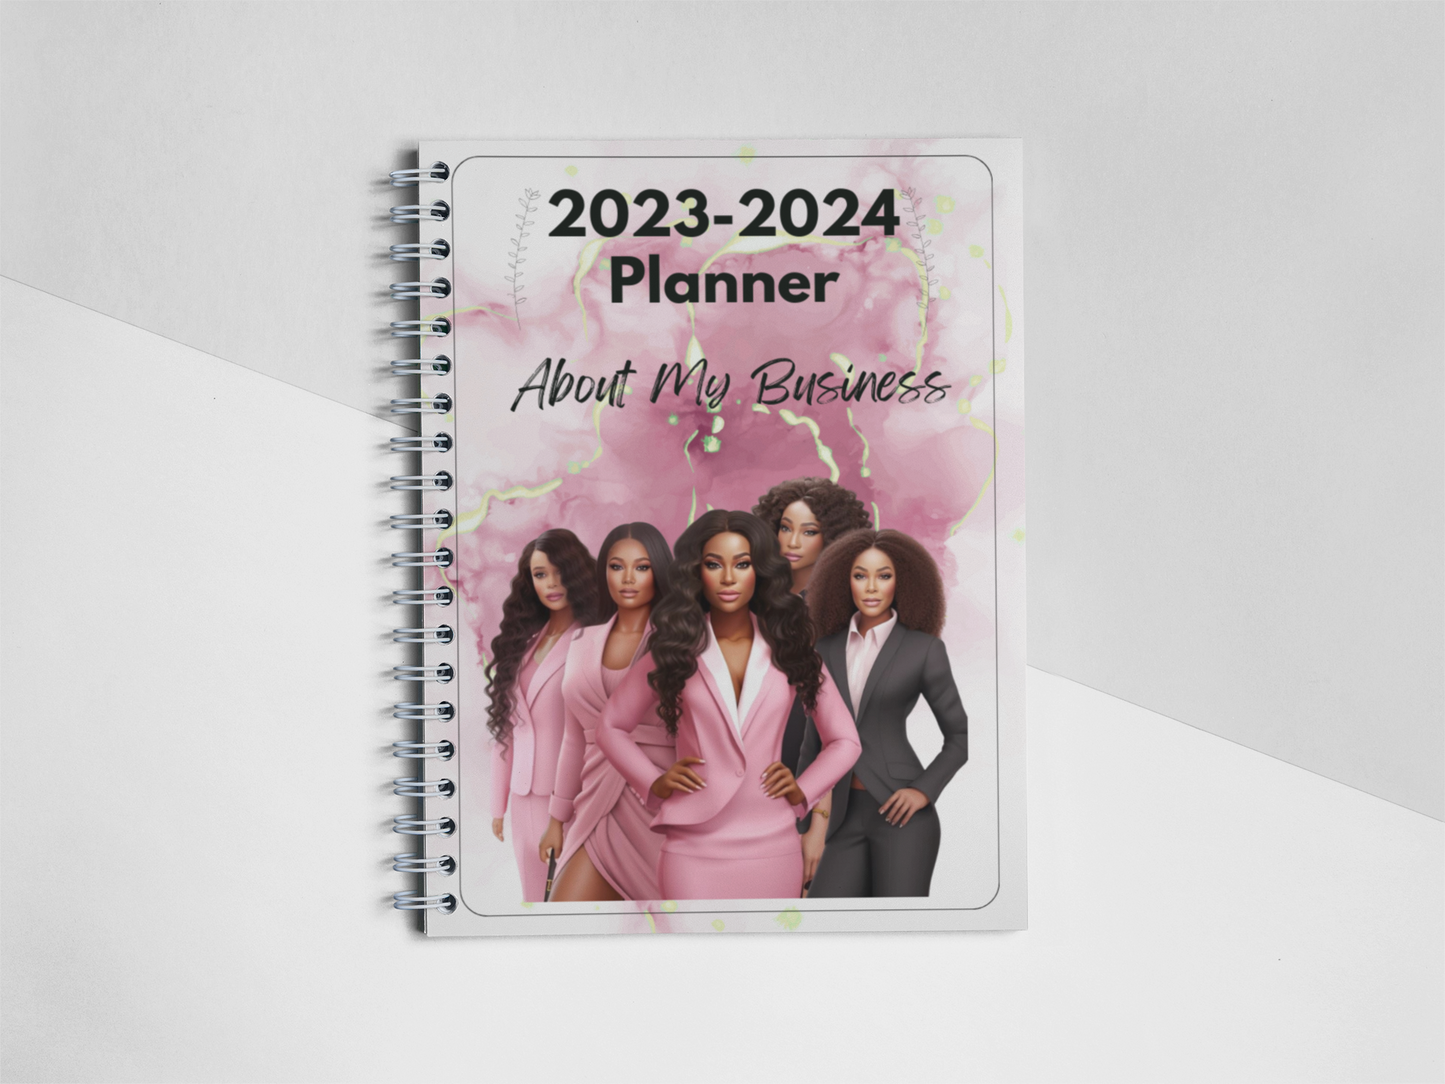 About My Business 2023-2024 Planner * 136 pages (front & back)